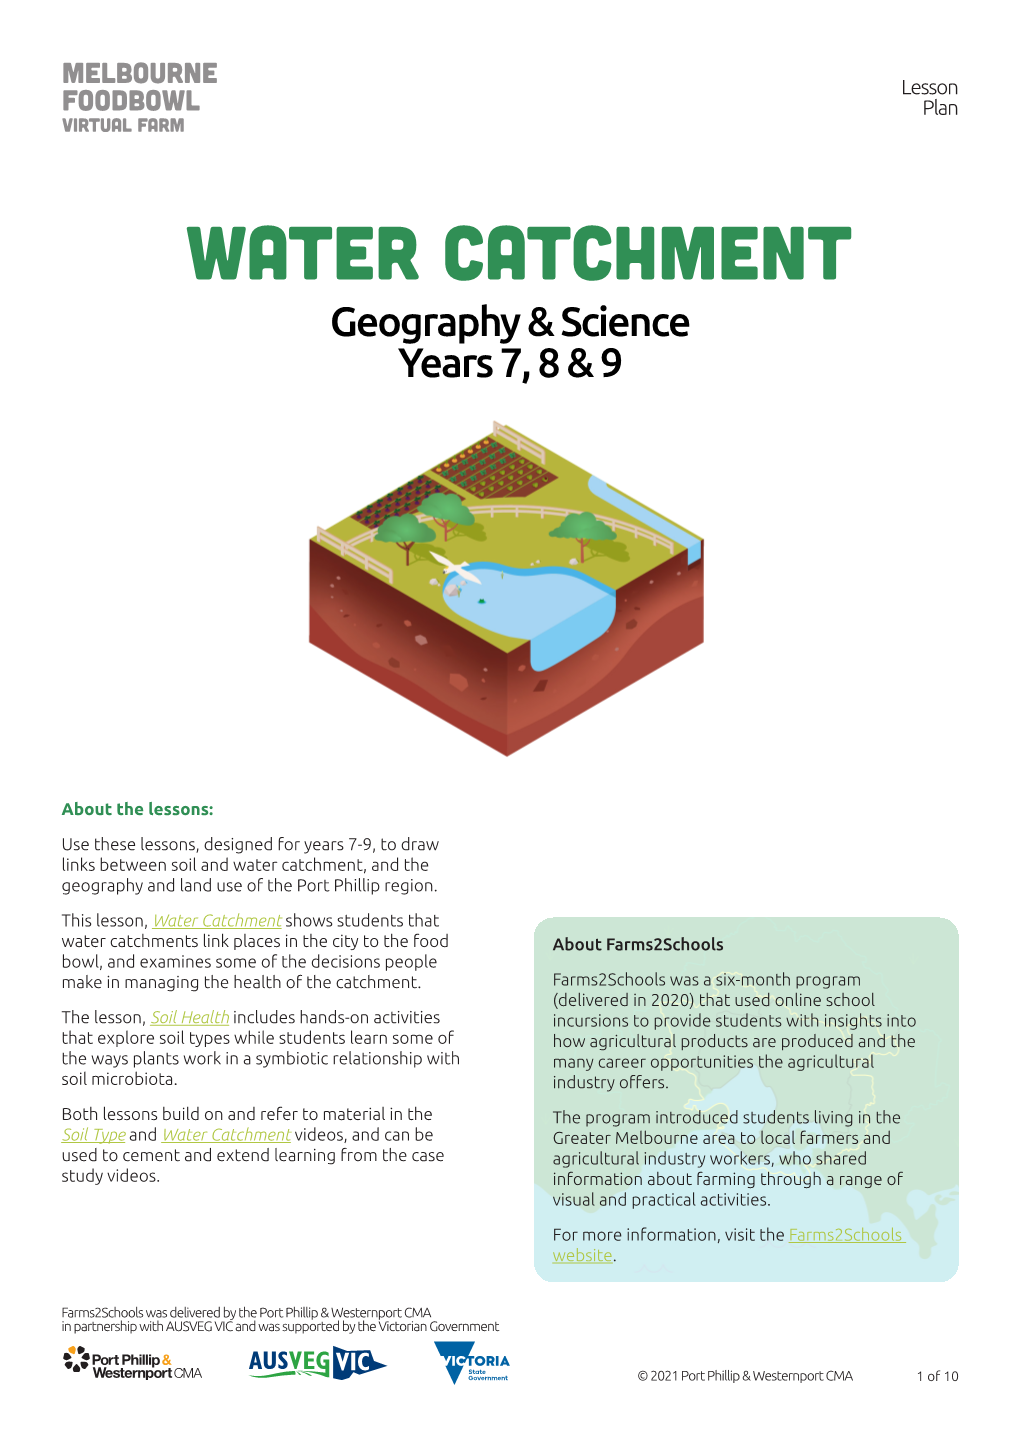 Water Catchment Geography & Science Years 7, 8 & 9